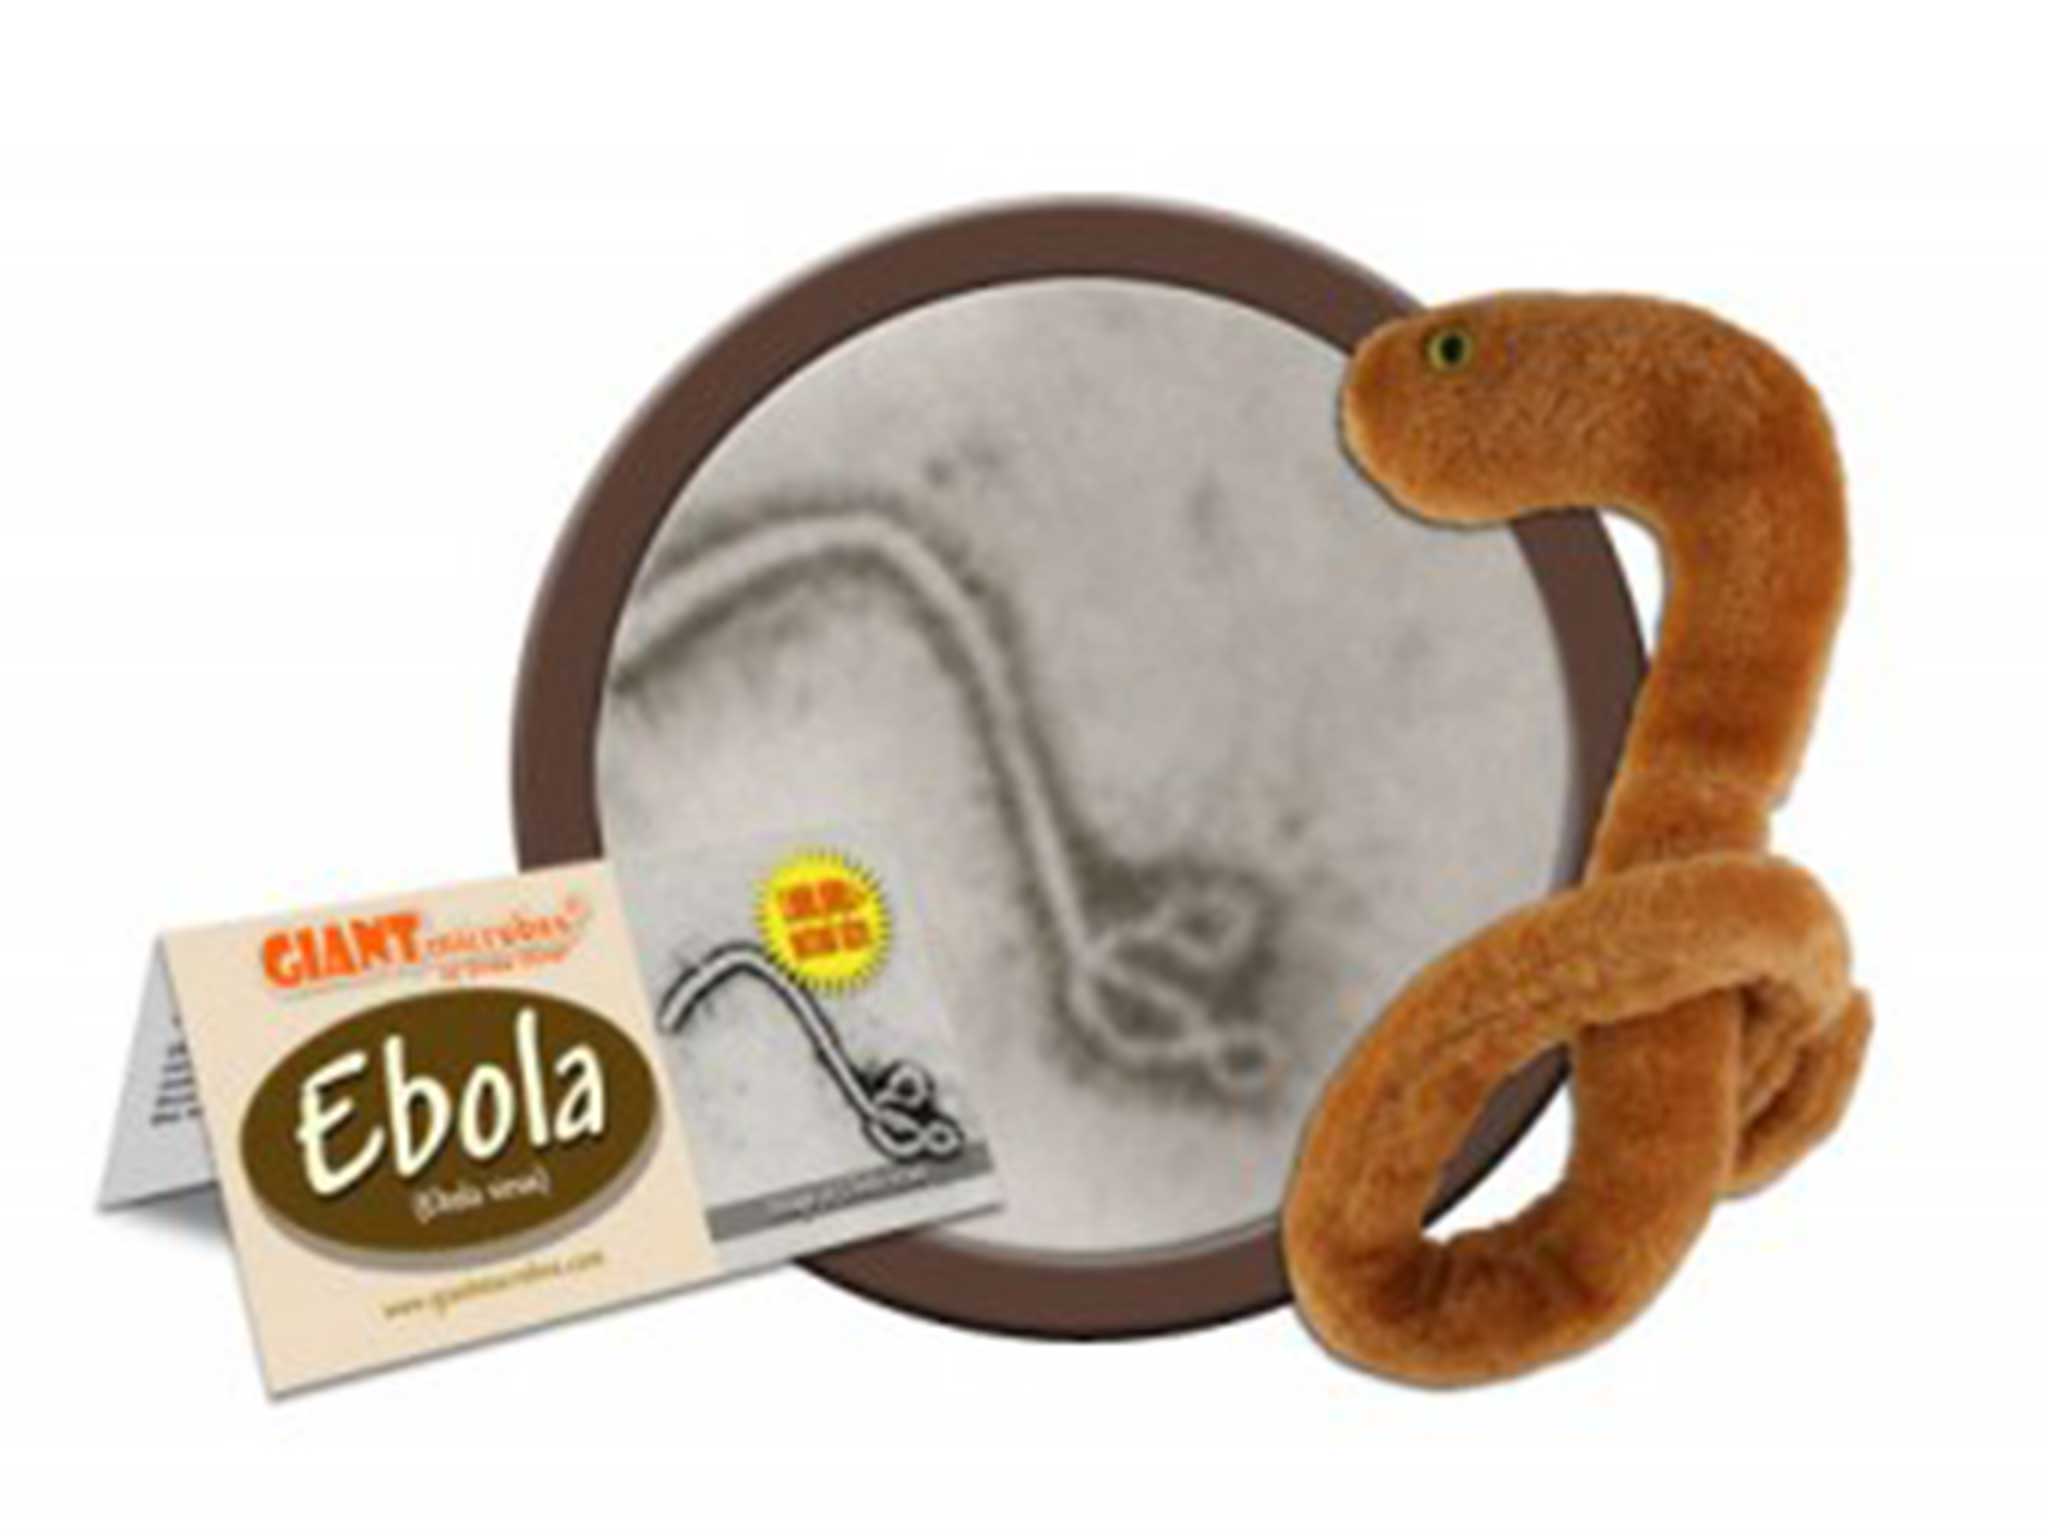 The Ebola-themed toys as advertised on the website